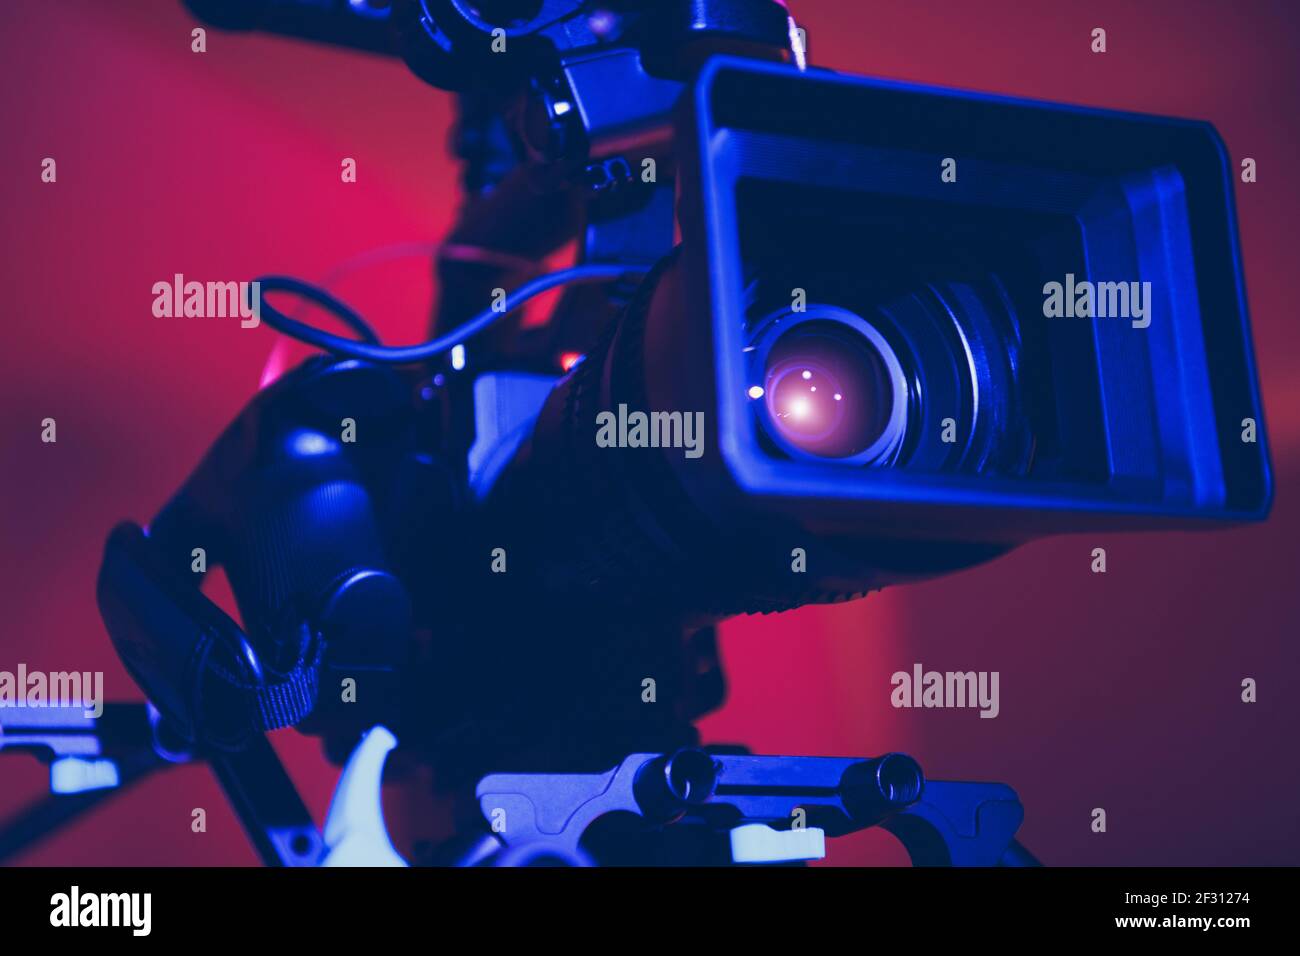 Modern Digital Cinema Camera with Moto Zoom Telephoto Lens Attached in Blue  and Red Film Stage Illumination Close Up. Film Industry Equipment Stock  Photo - Alamy